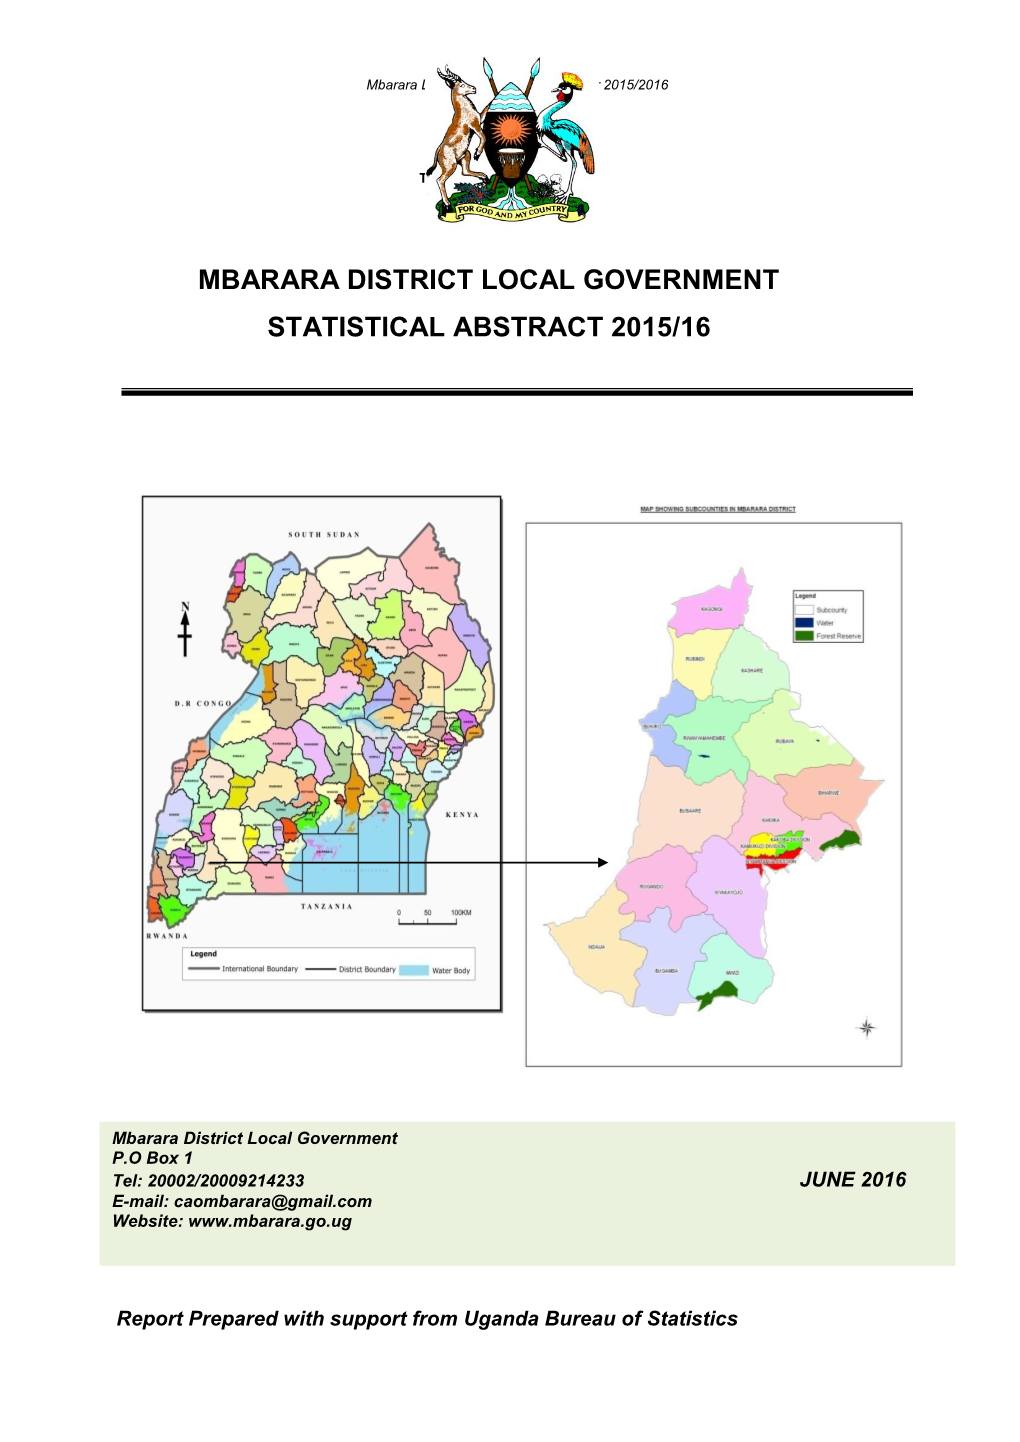 Mbarara District Local Government Statistical Abstract 2015/16